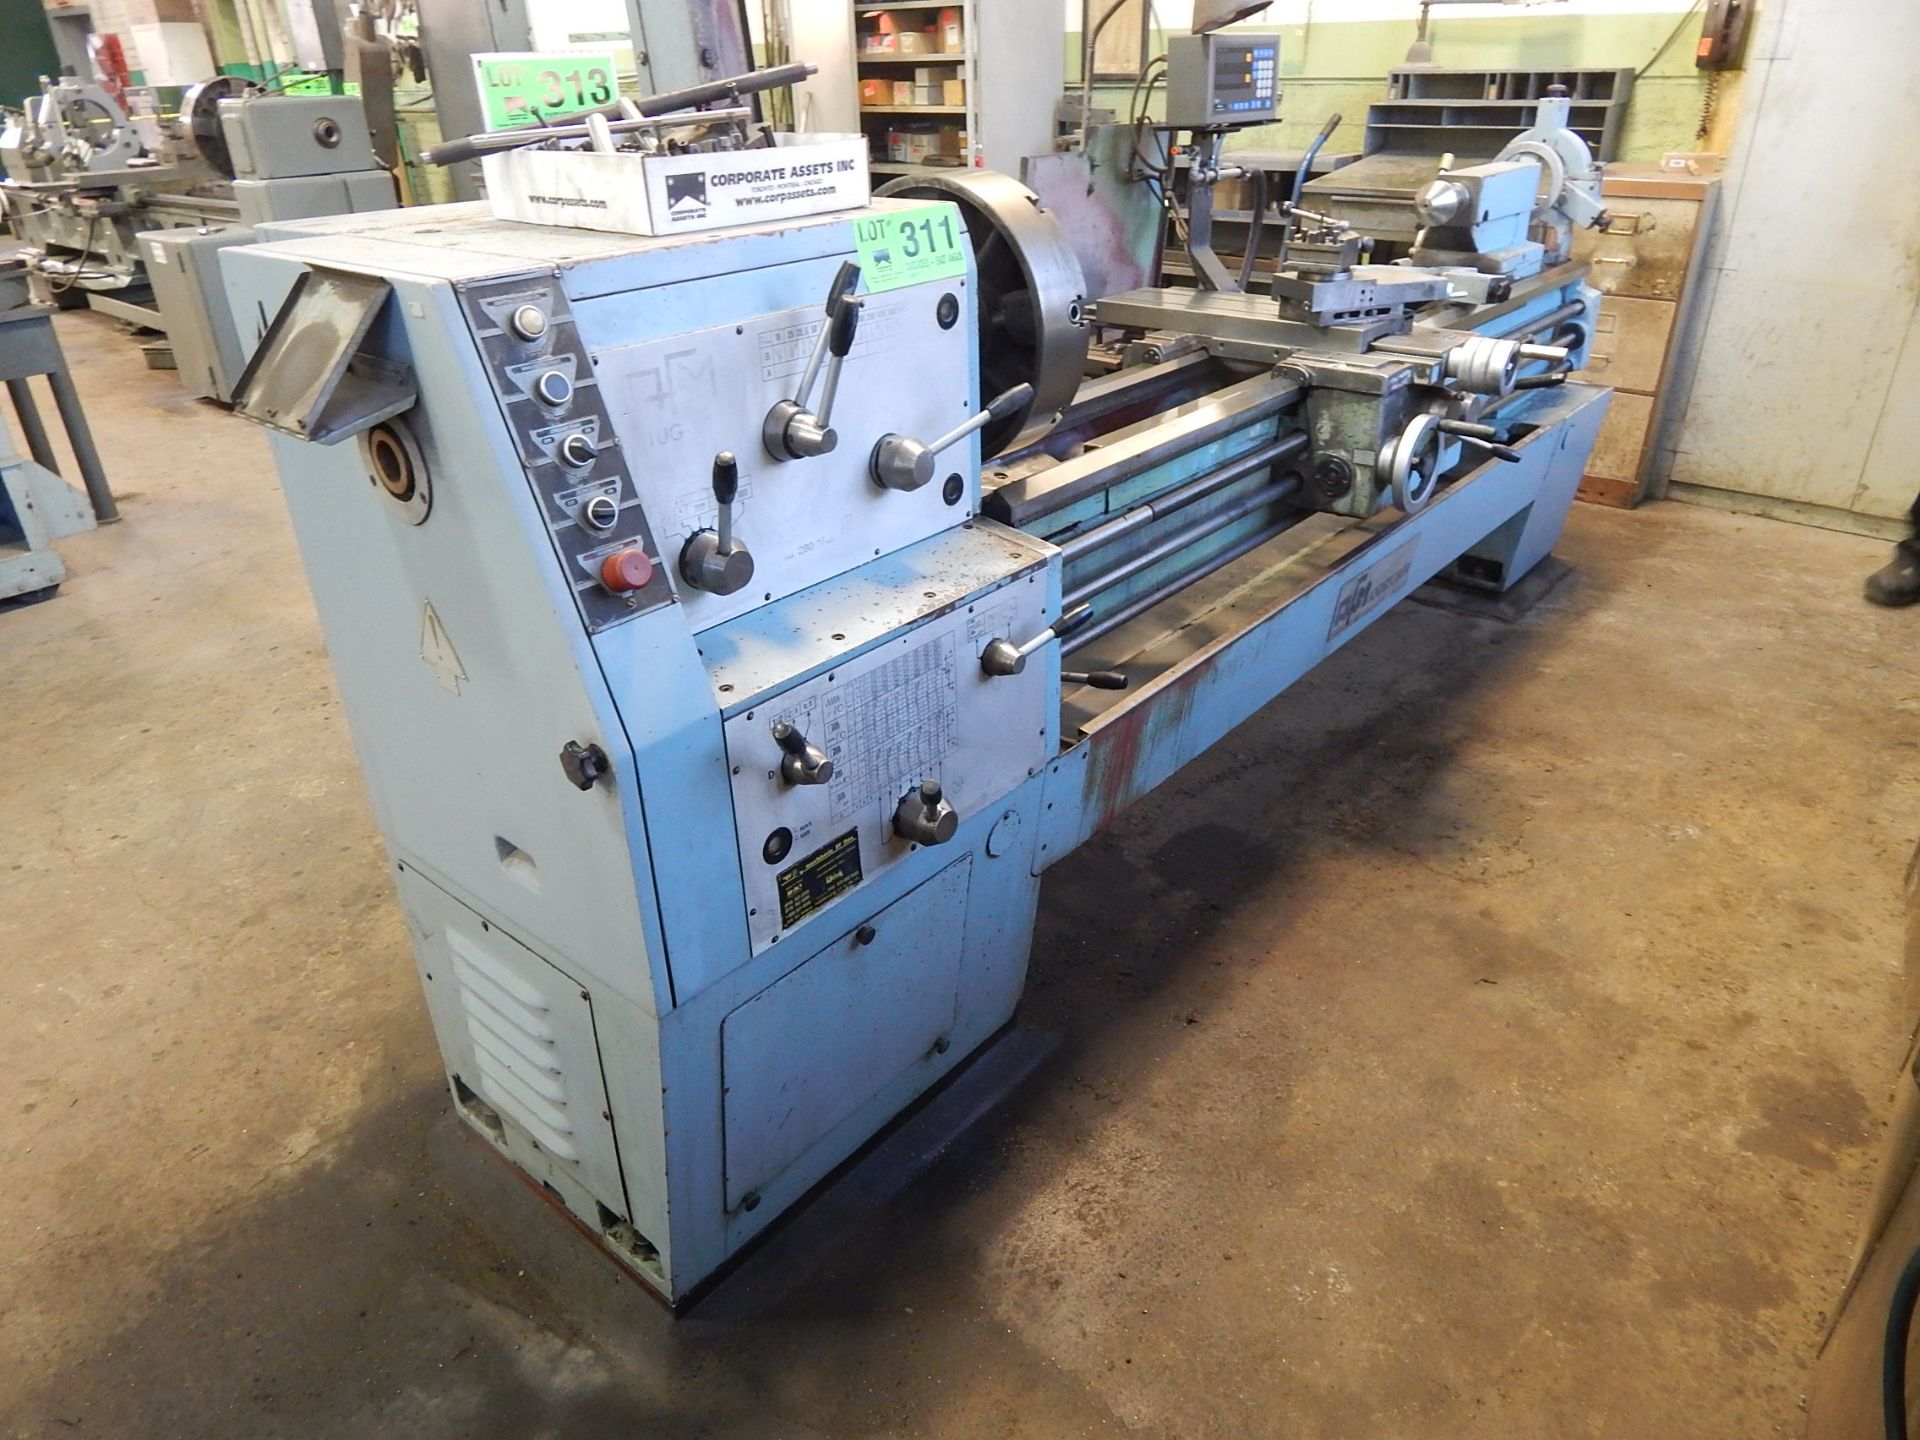 AFM  (1993) TUG 40 GAP BED ENGINE LATHE WITH 20" SWING OVER BED, 80" CENTERS, 10" CHUCK, 2.5"